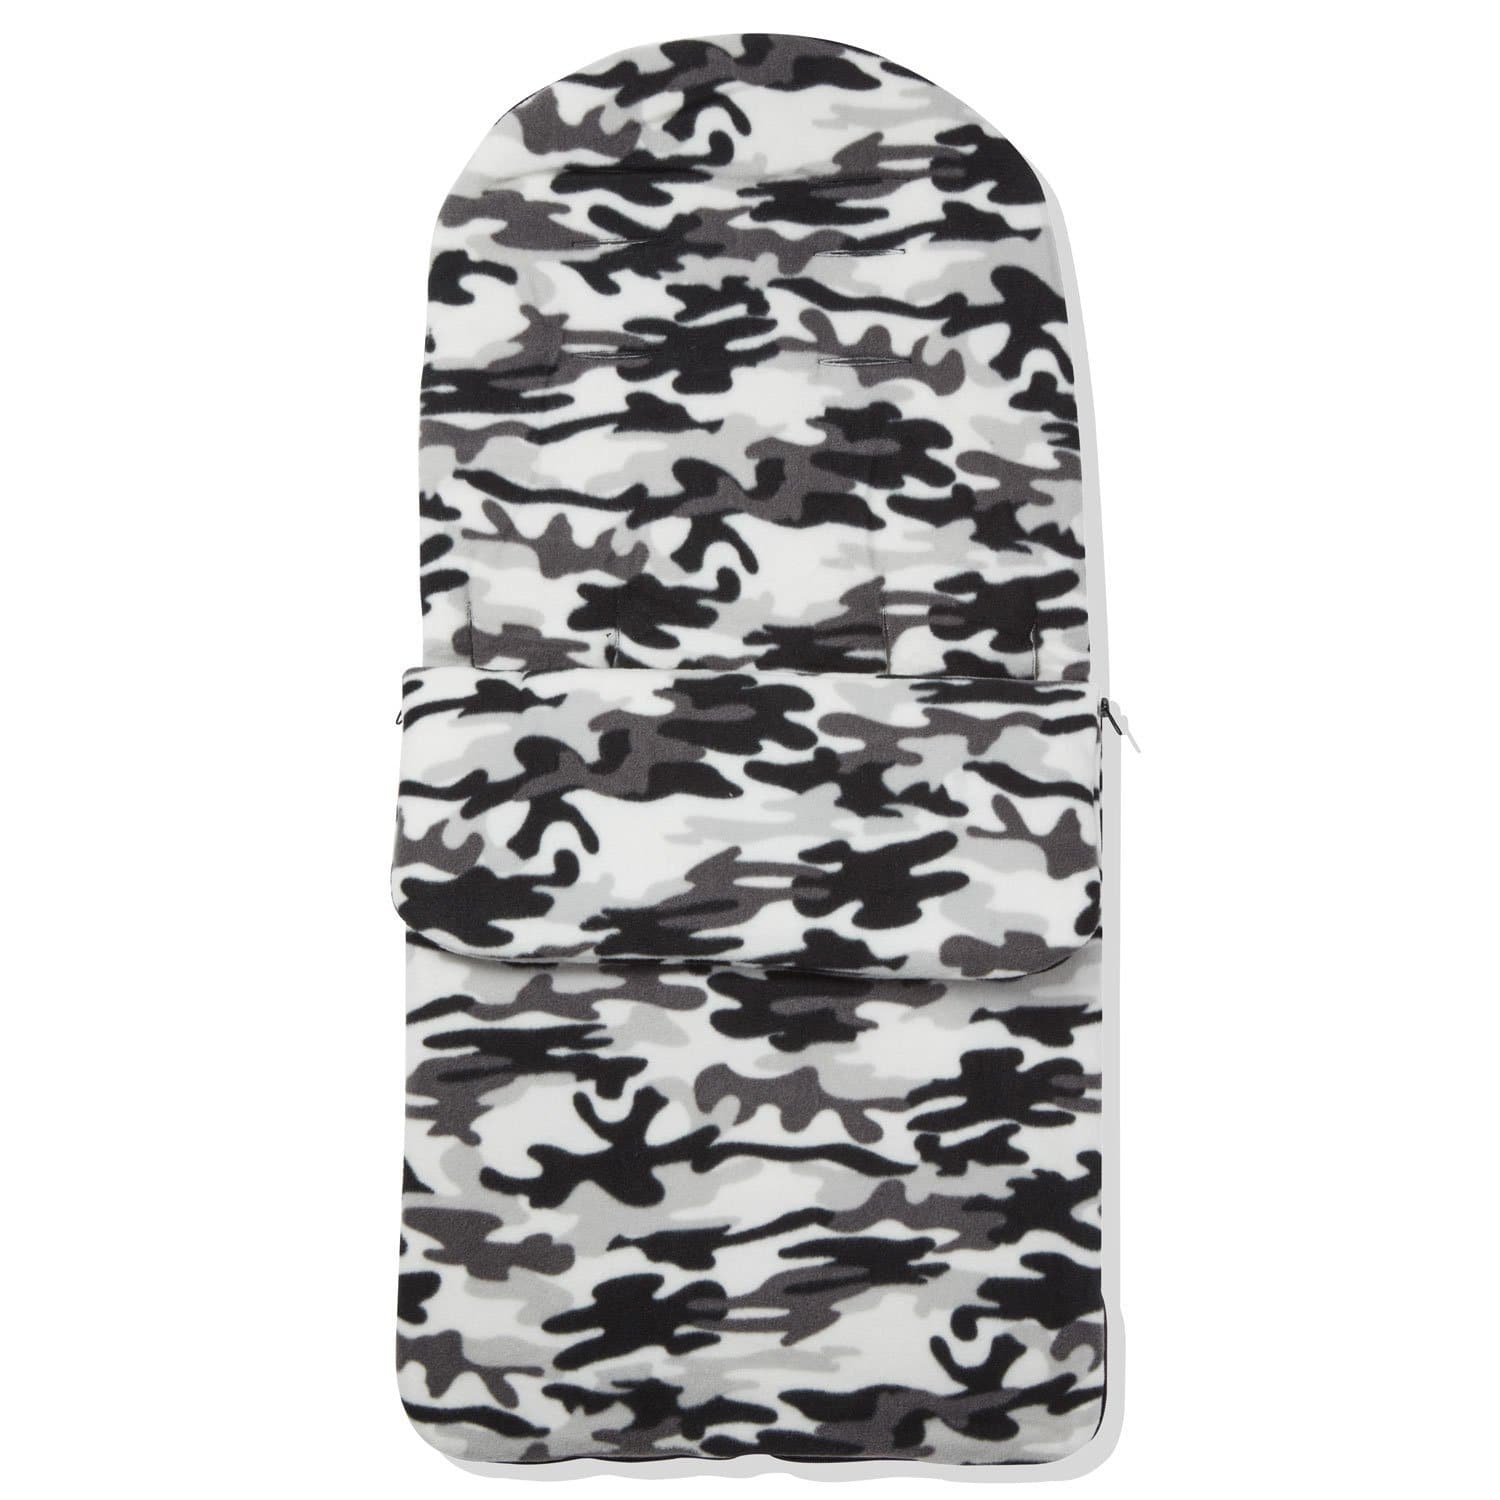 Fleece Footmuff / Cosy Toes Compatible with Firstwheels - Grey Camouflage / Fits All Models | For Your Little One